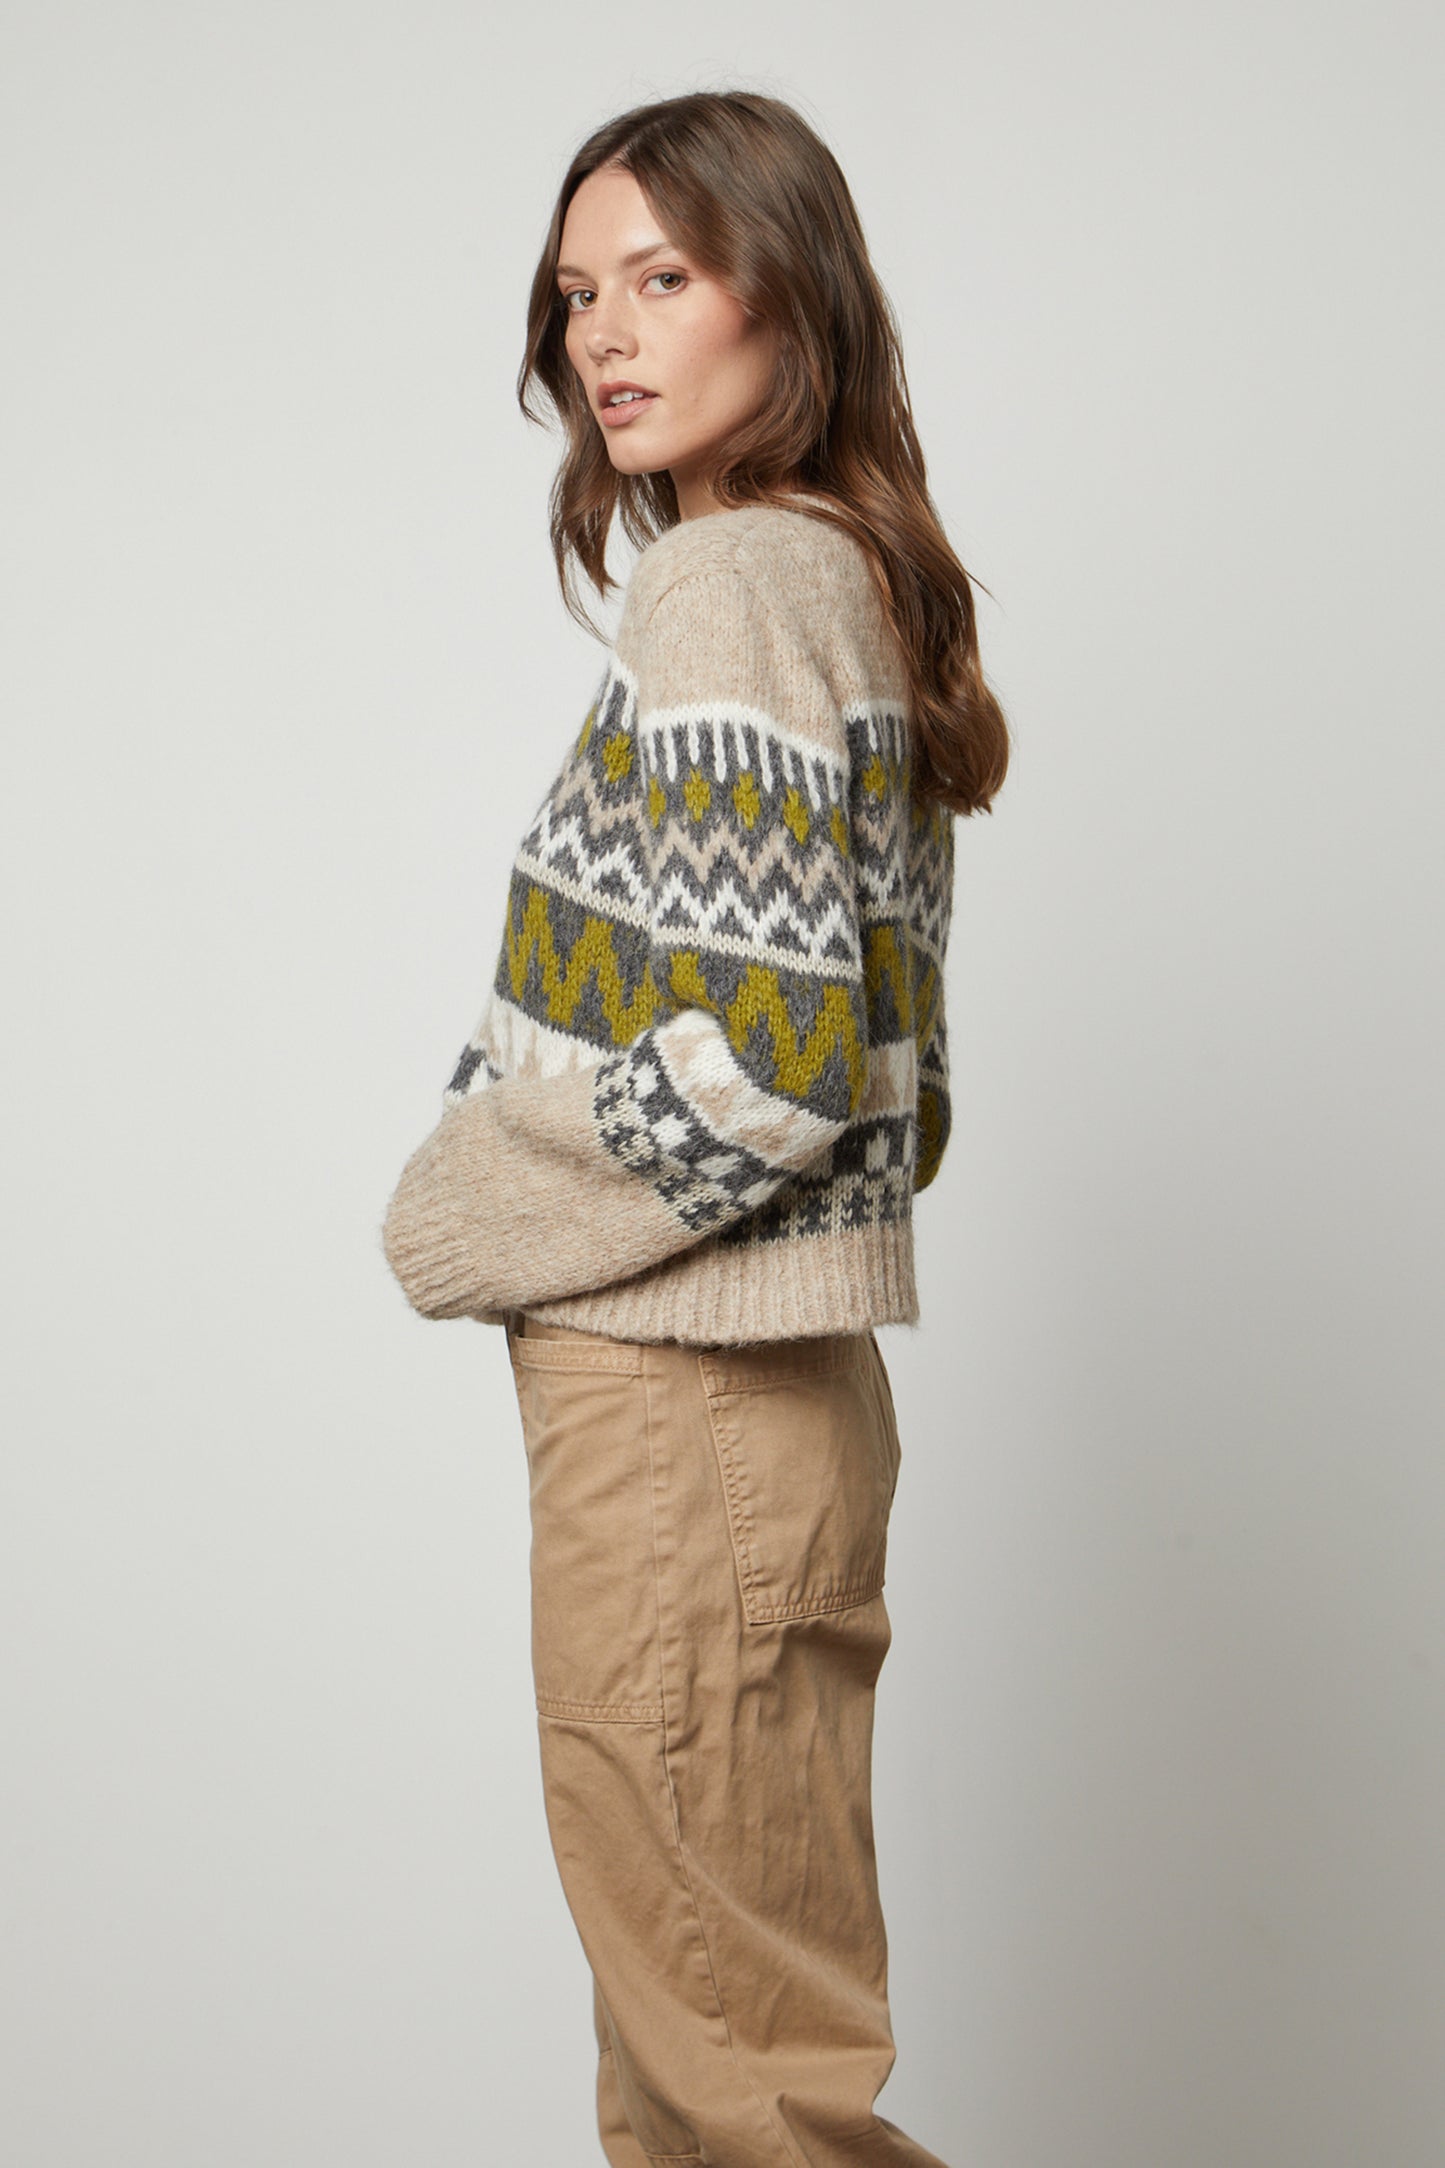 A cozy model wearing a MAKENZIE ALPACA CABLE KNIT CREW NECK SWEATER by Velvet by Graham & Spencer and khaki pants.-35626092921025